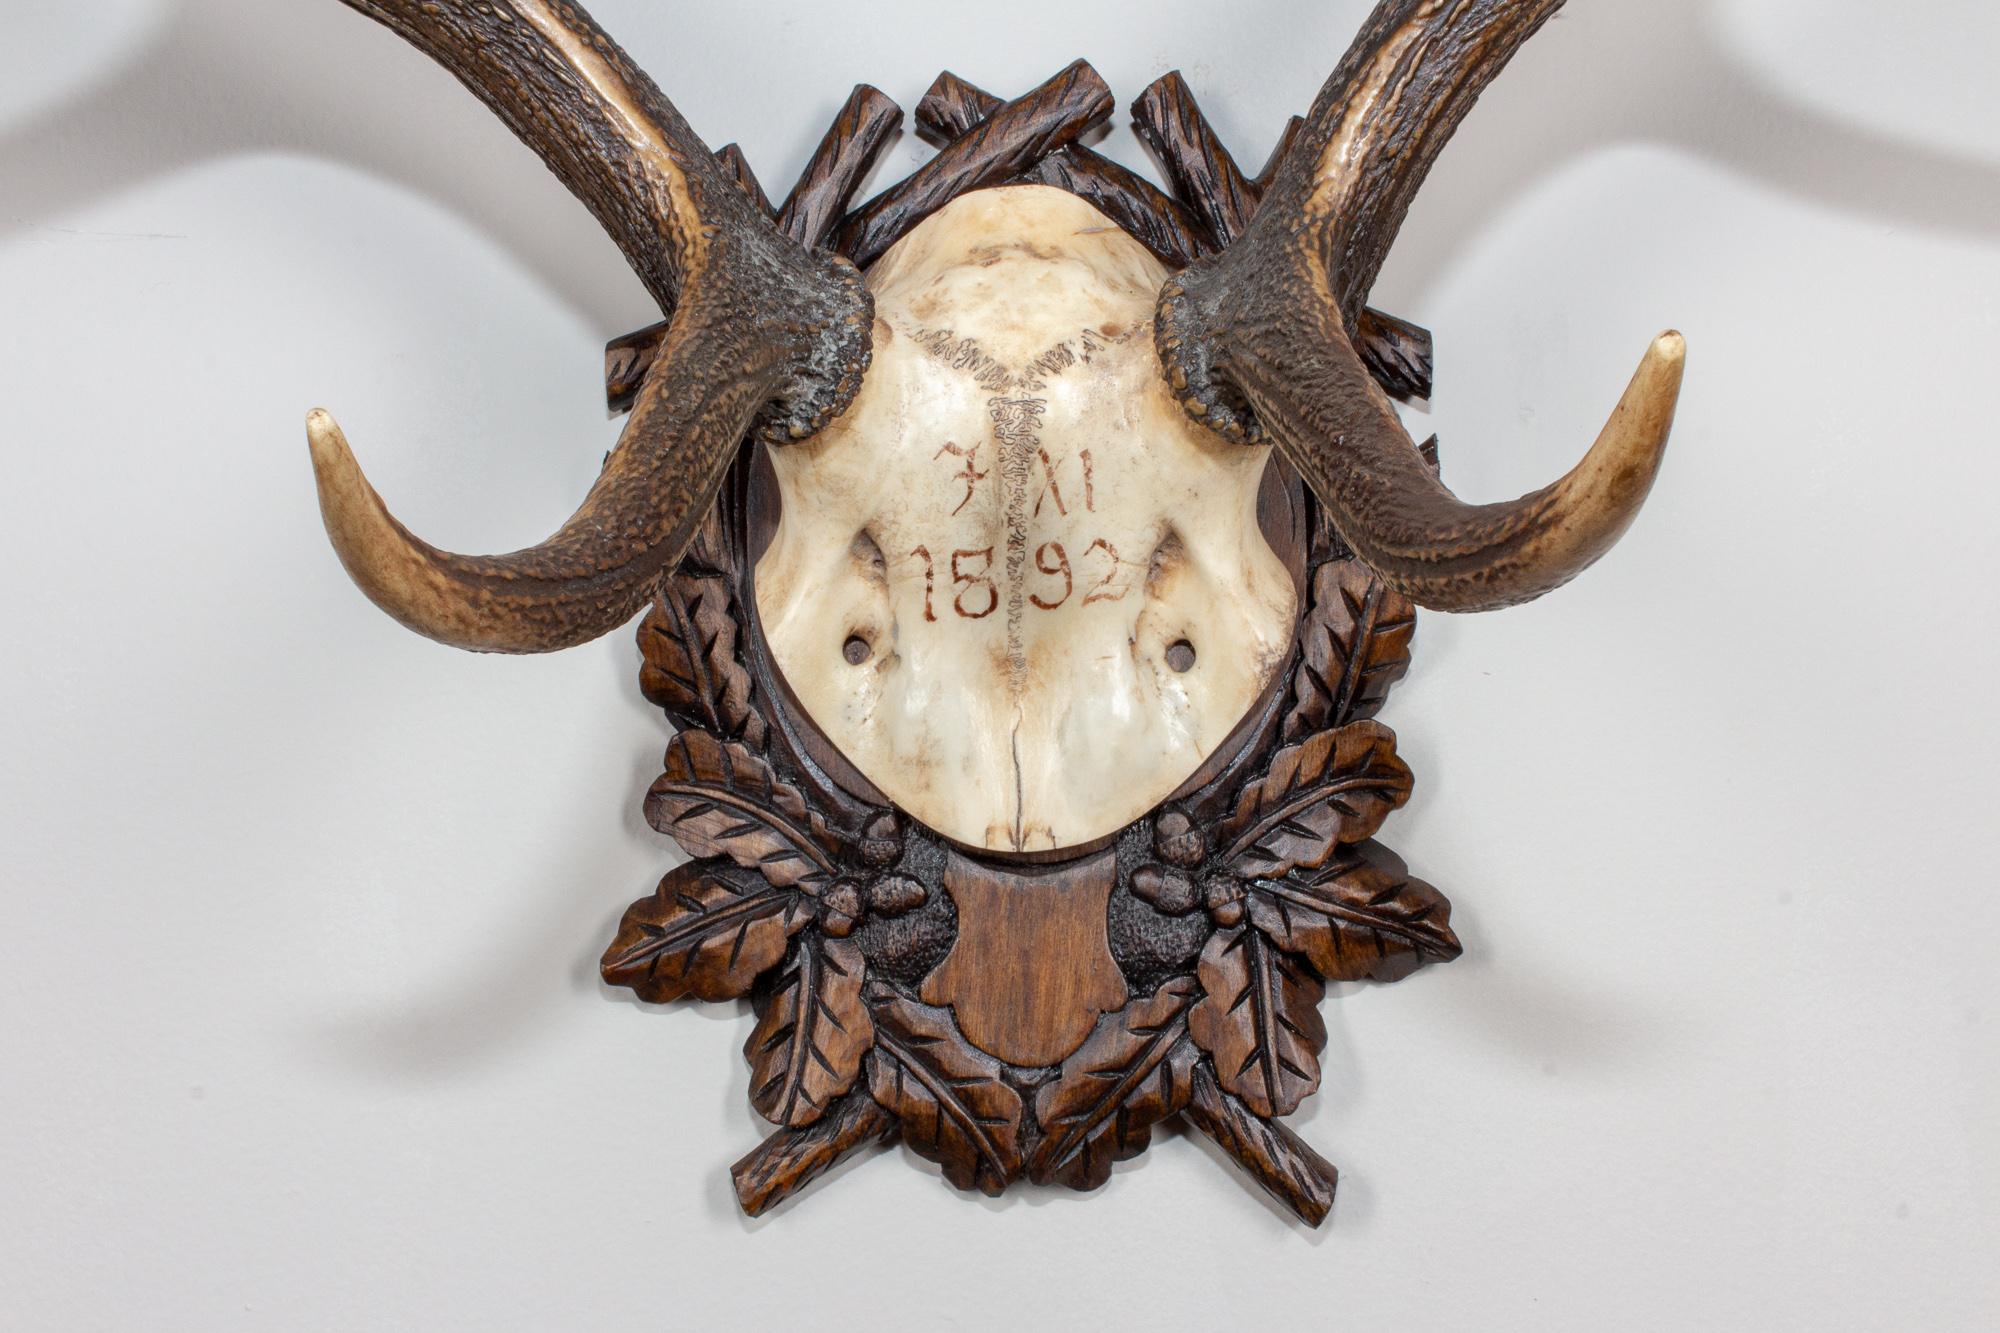 19th century Austrian red stag trophy on original Black Forest carved plaque that hung in Emperor Franz Josef's castle at Eckartsau in the Southern Austrian Alps. Eckartsau was a favourite hunting schloss of the Habsburg family. The plaque itself is